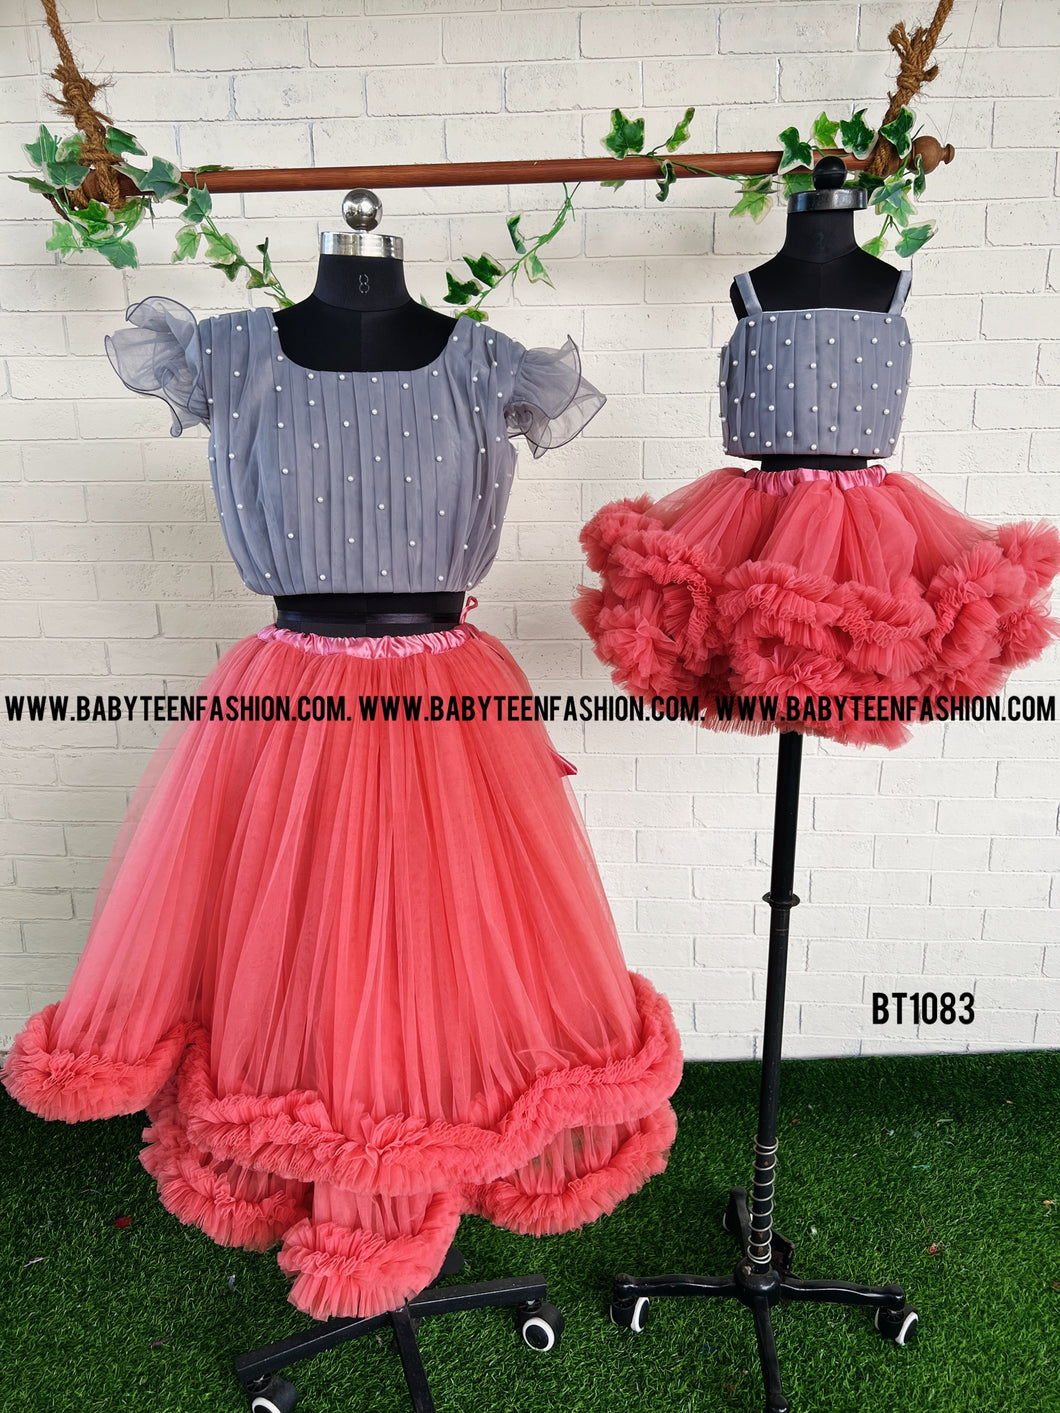 BT1083 Mom Skirt and Crop Top WIth Pearl Intrications